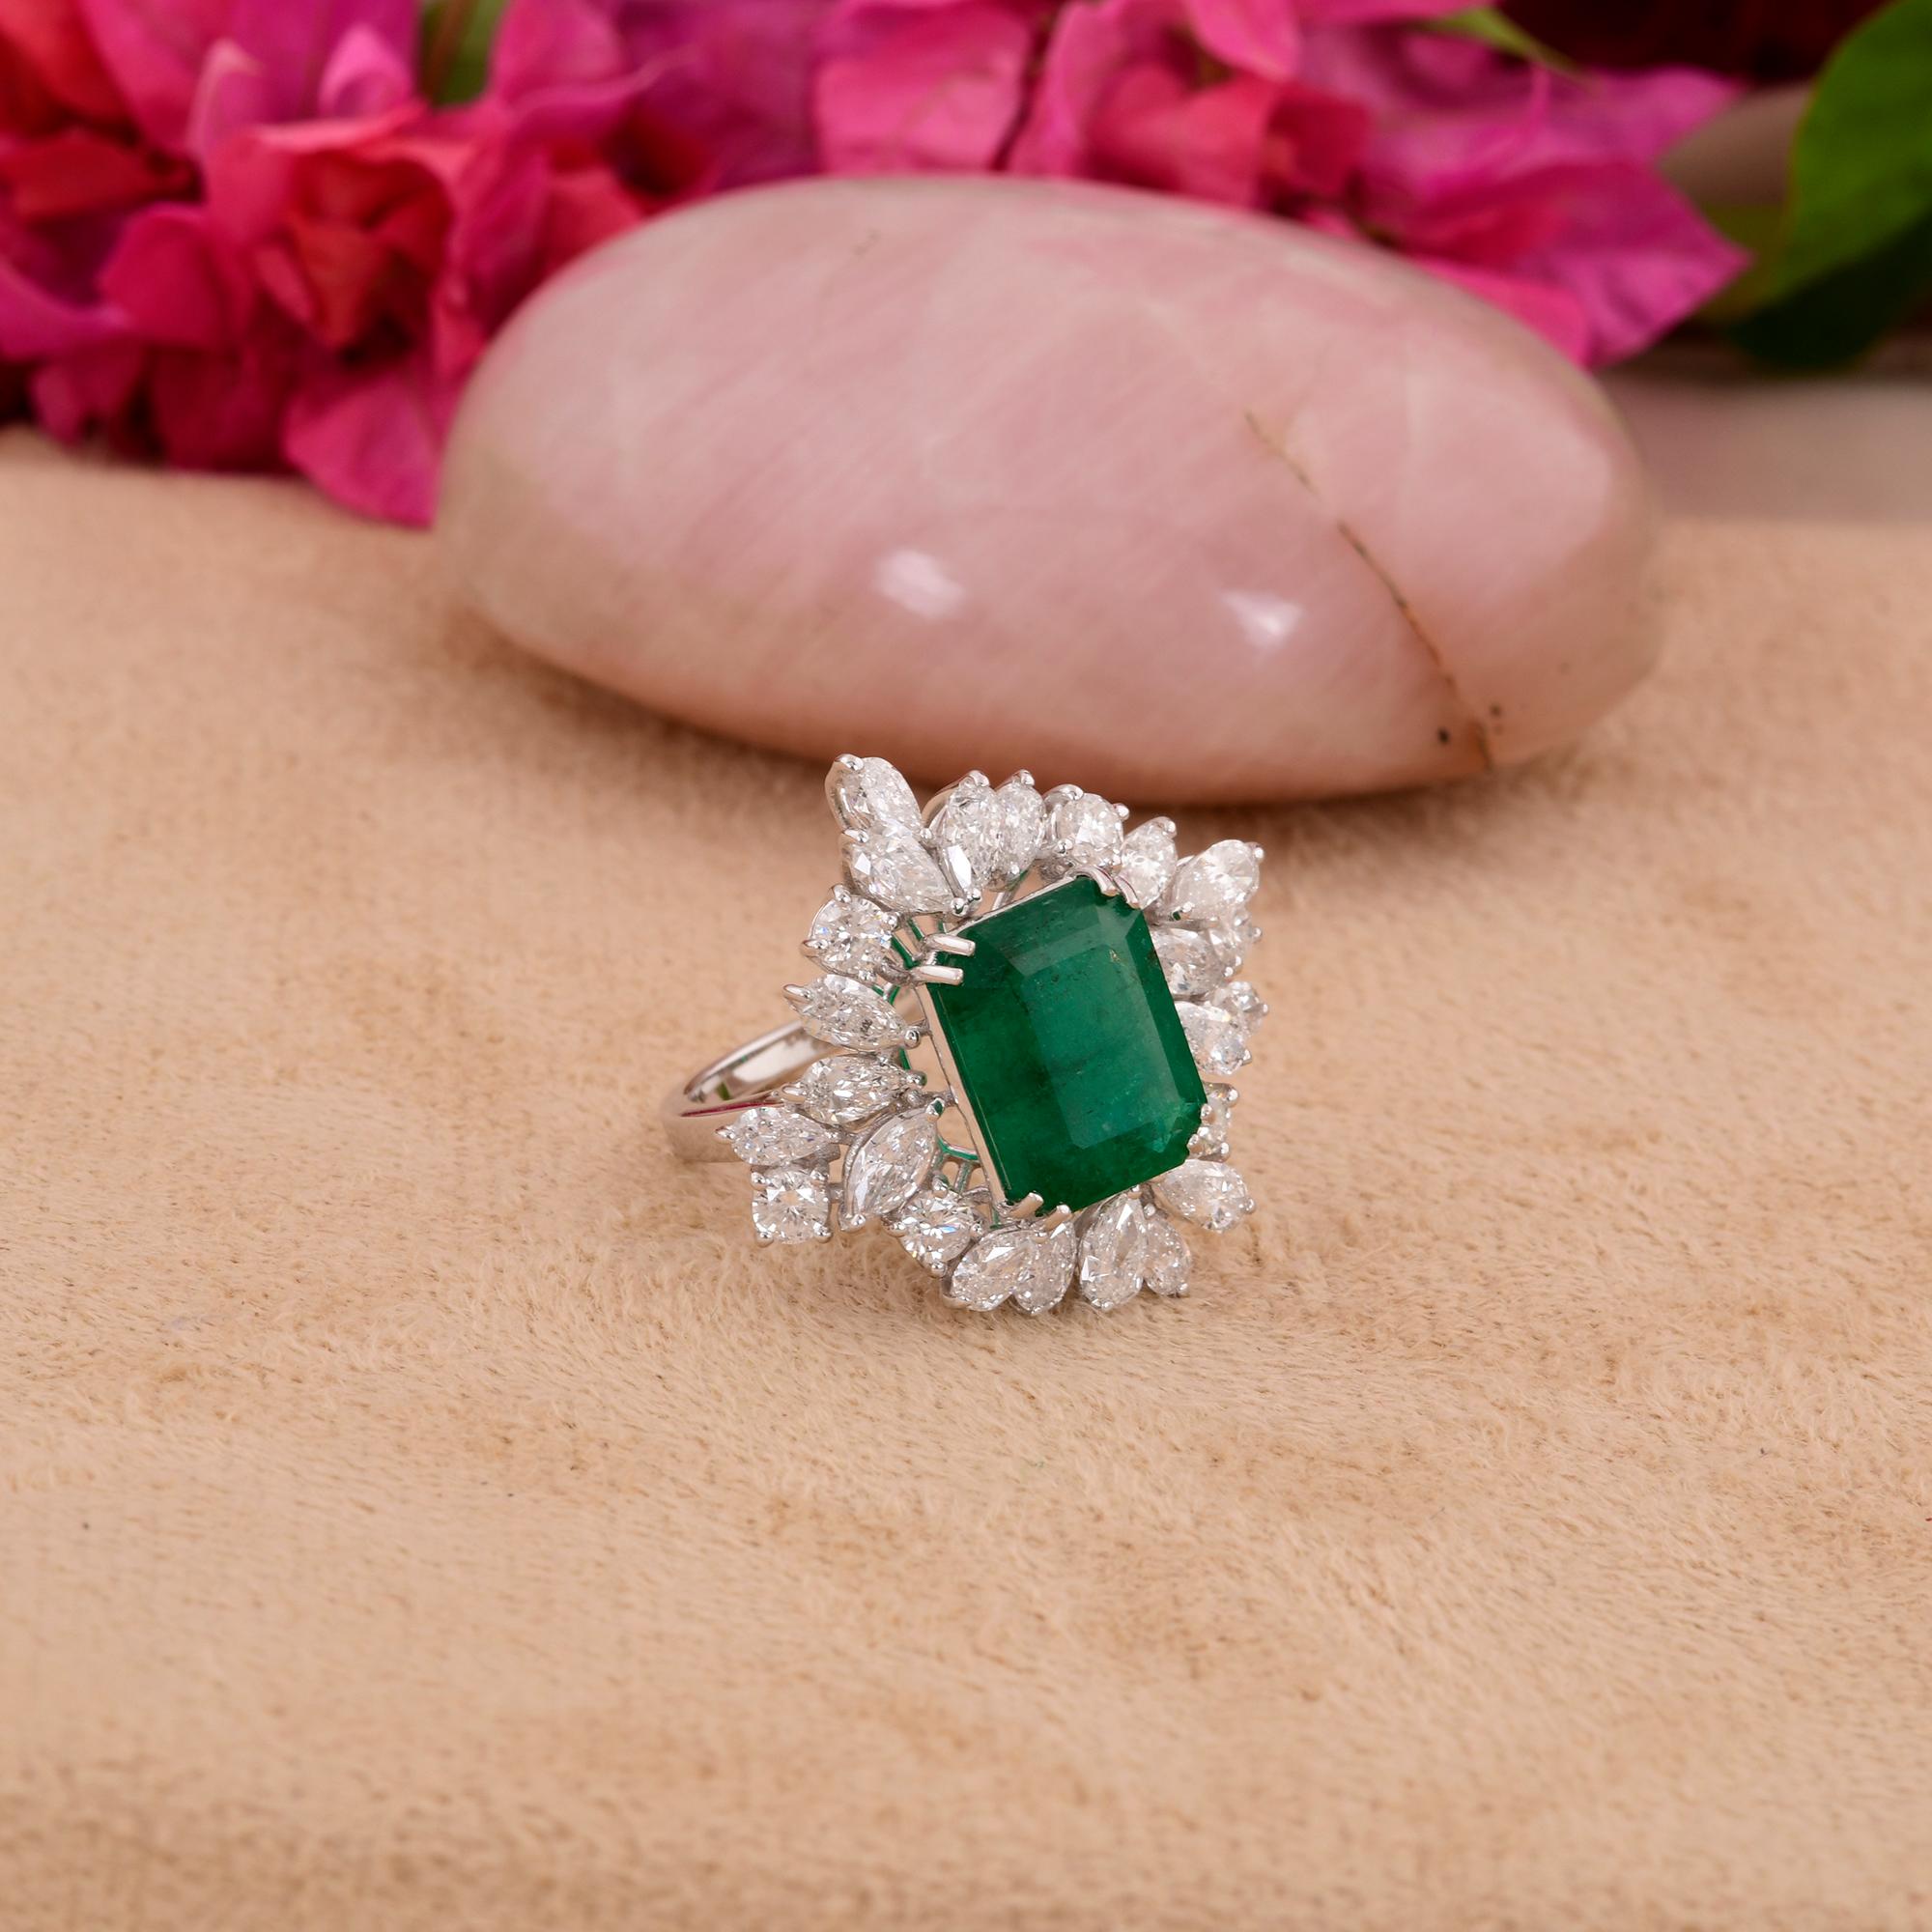 Step into the world of luxury and sophistication with this captivating Zambian Emerald Gemstone Cocktail Ring, embellished with sparkling Diamonds and meticulously crafted in elegant 18 Karat White Gold. This exquisite piece of fine jewelry is a